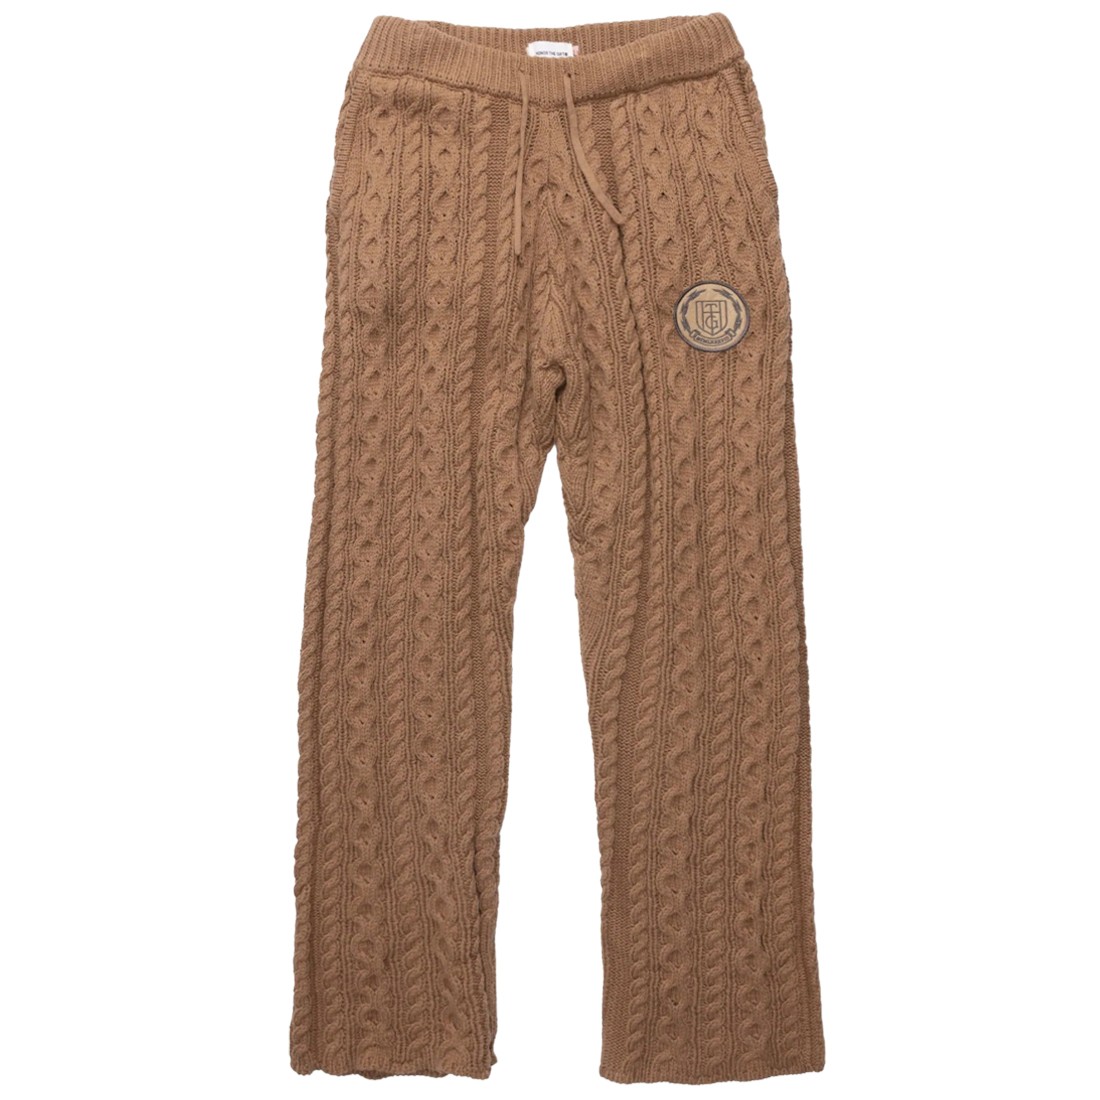 Honor The Gift Men Cable Knit Pants (brown / tan)